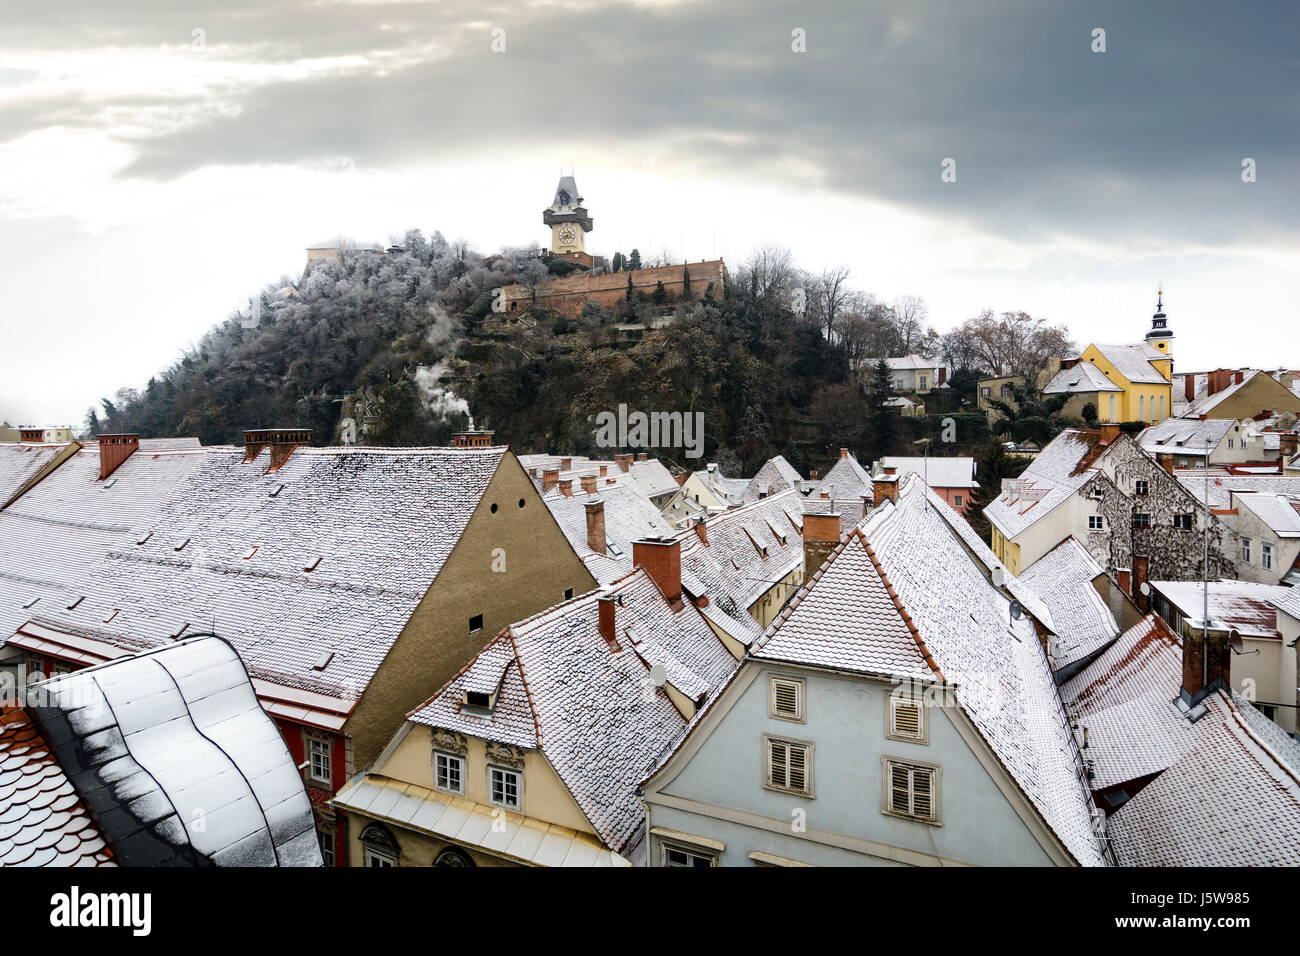 Graz winter scene with clock tower and snowy rooftops Stock Photo